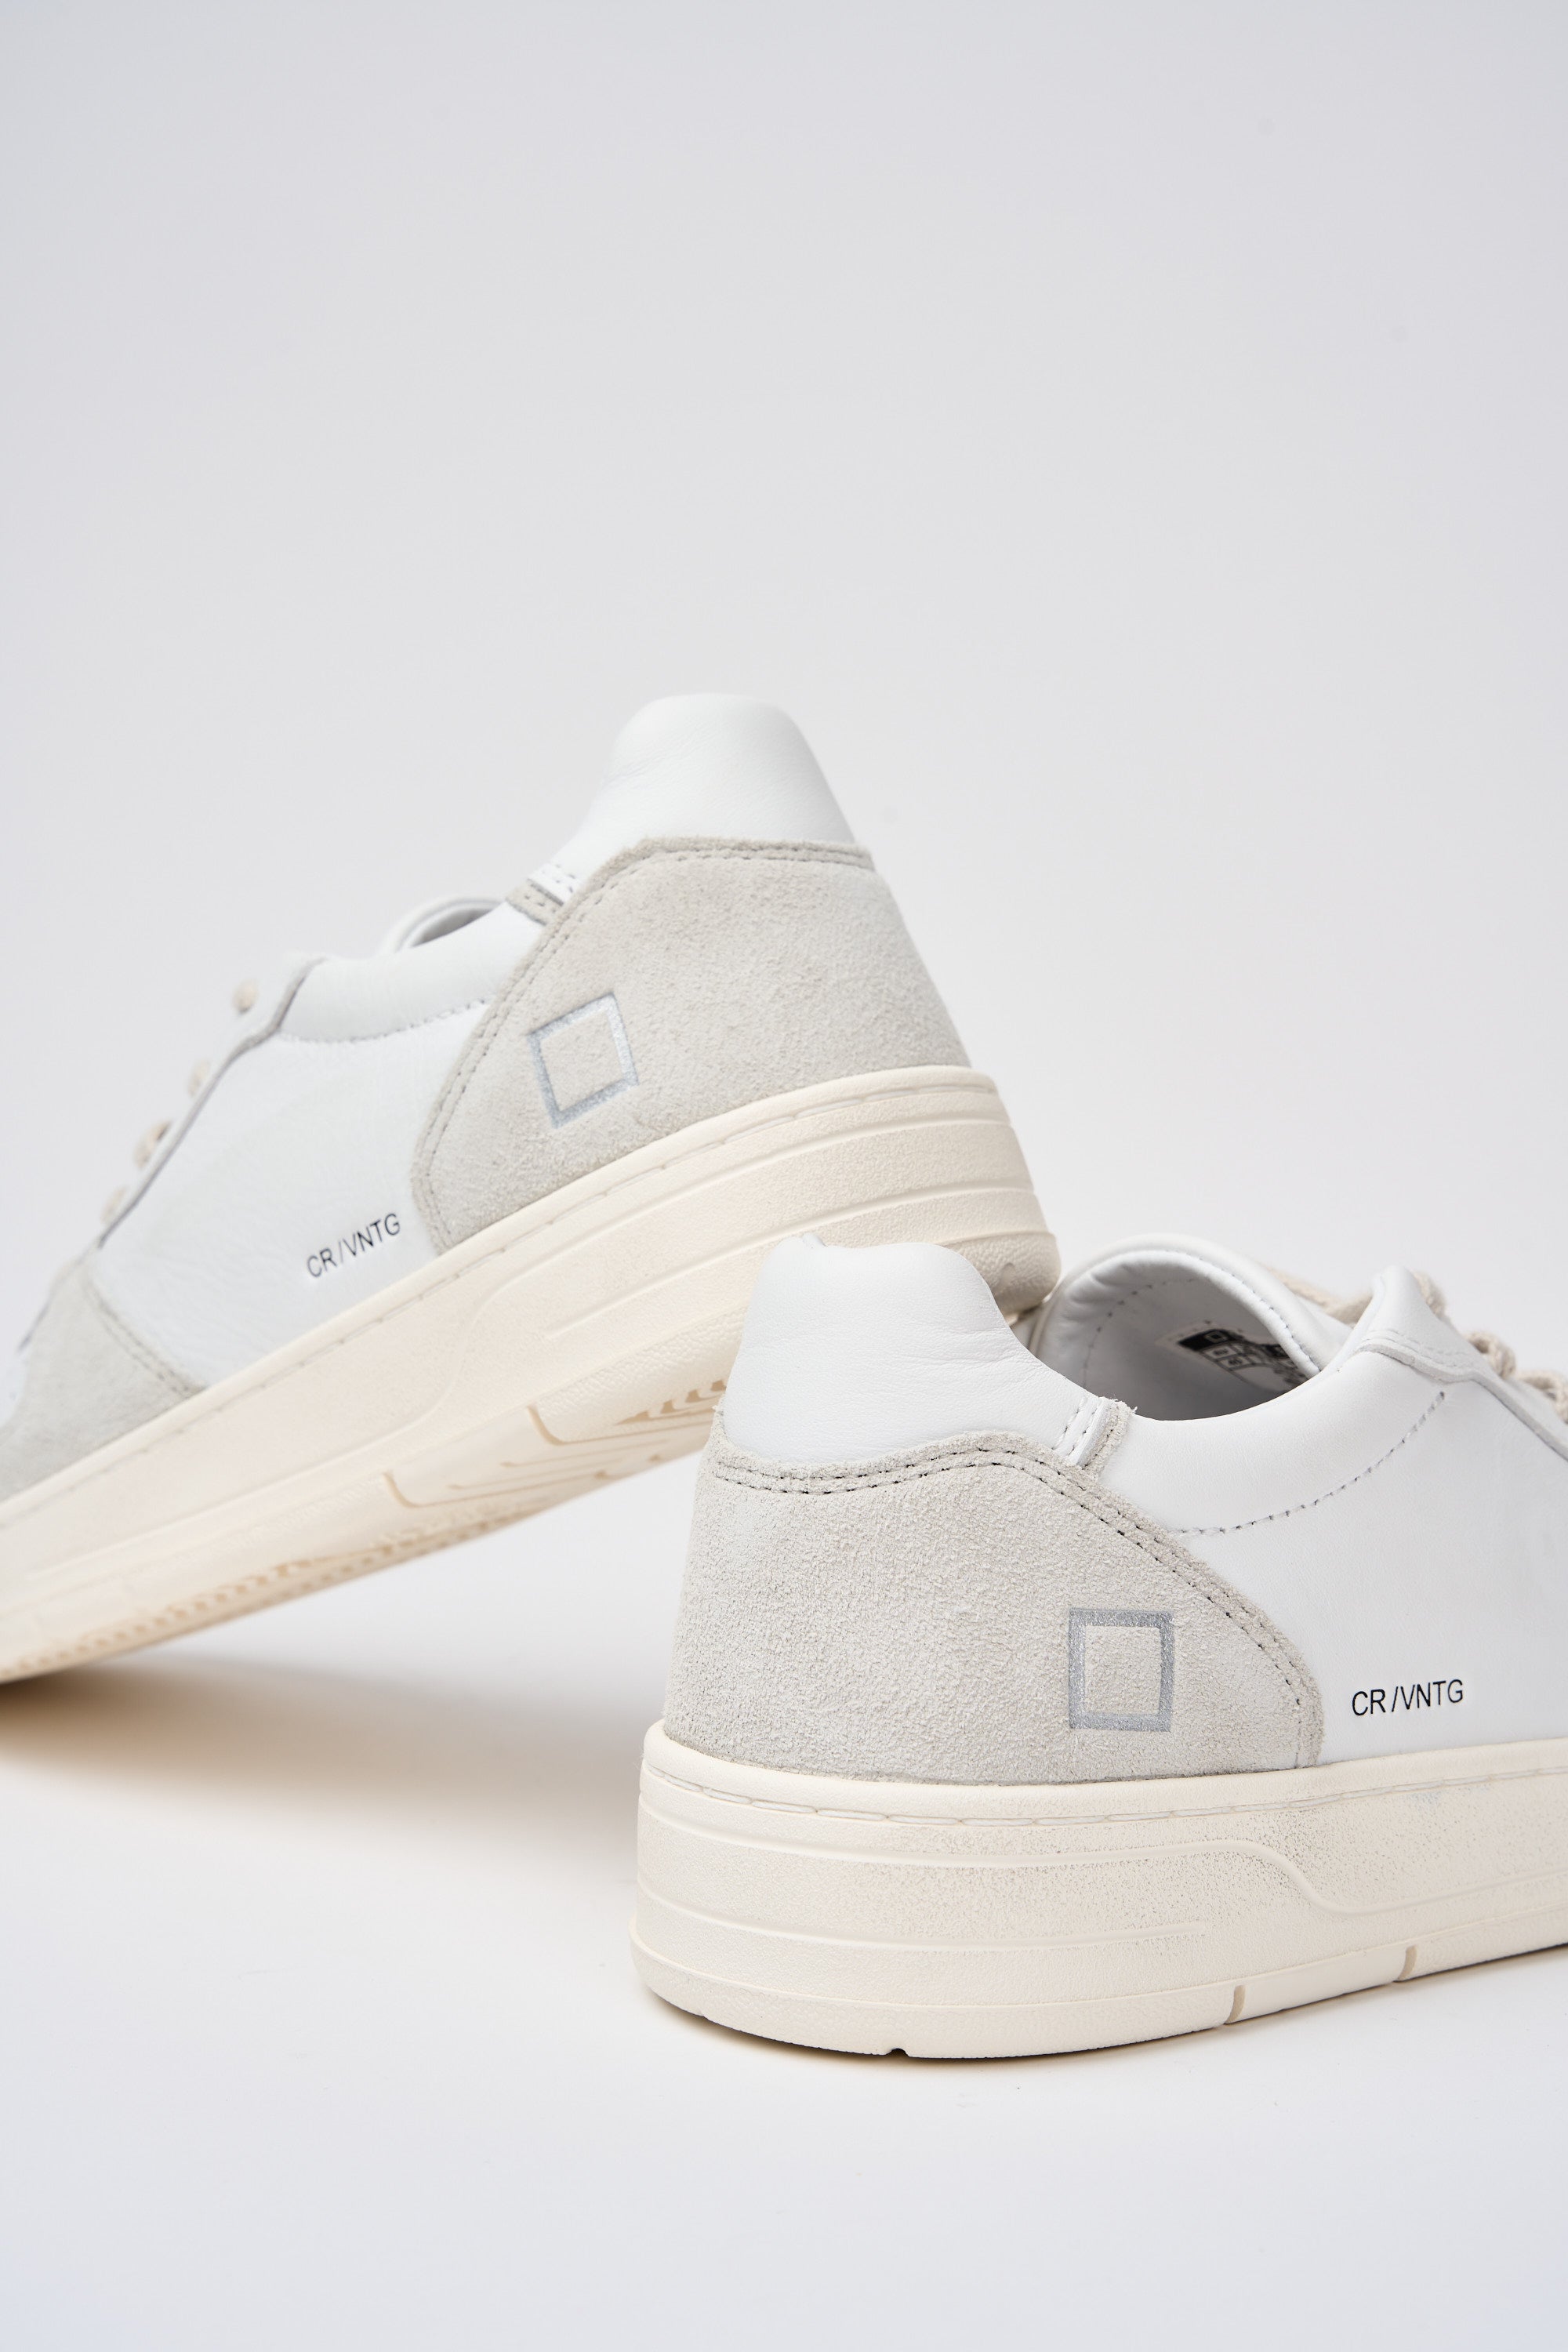 D.A.T.E. Court Vintage Leather/Suede White Sneakers-4